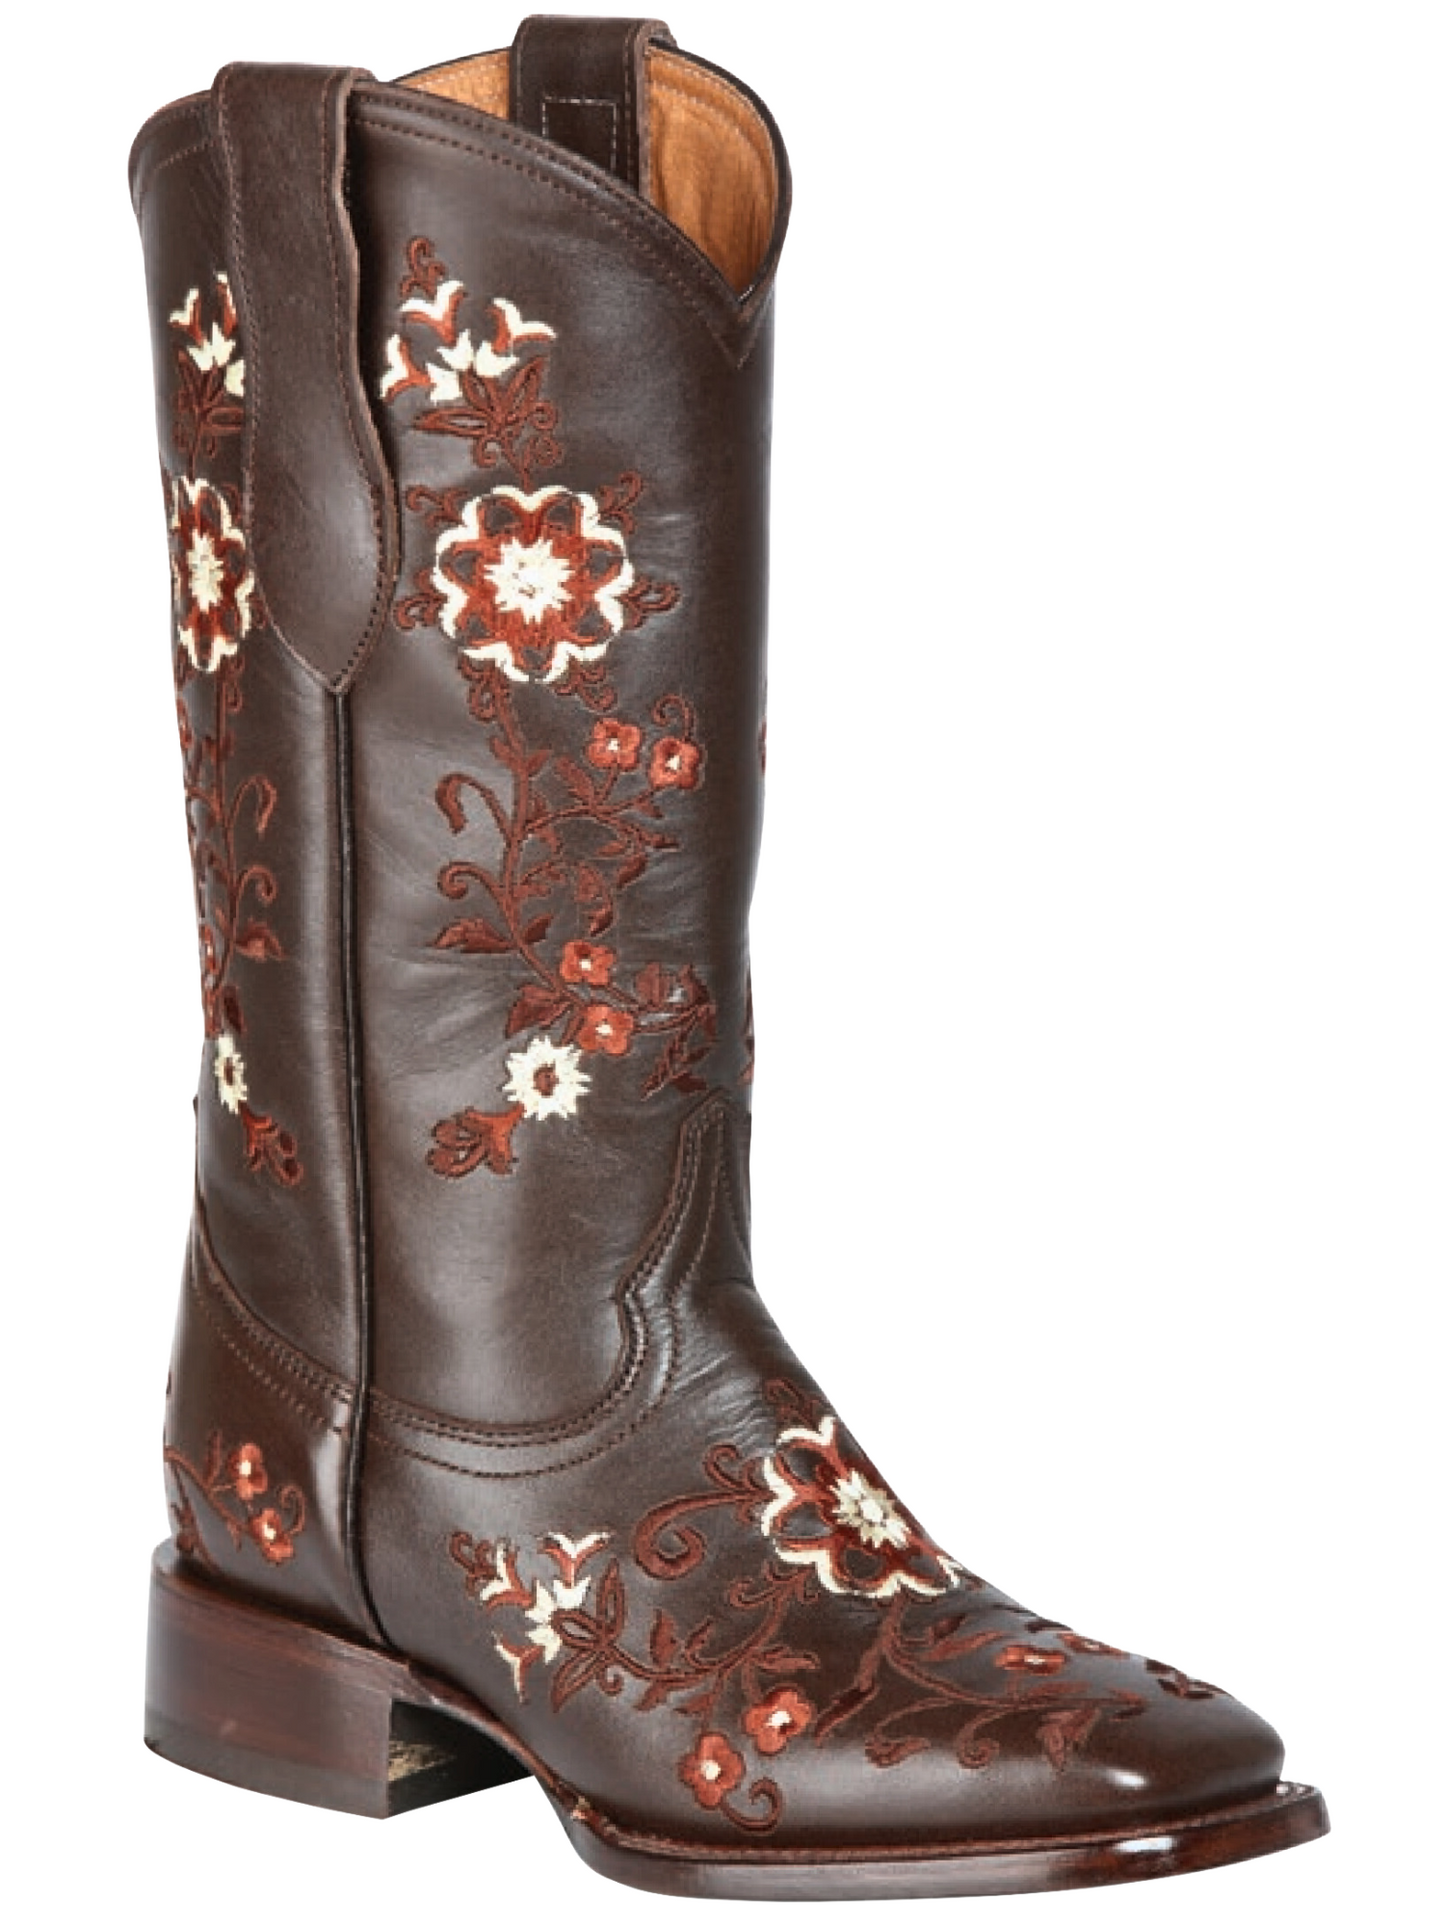 Women's Genuine Leather Flower Embroidered Rodeo Cowboy Boots 'Jar Boots' - ID: 126444 Cowgirl Boots Jar Boots